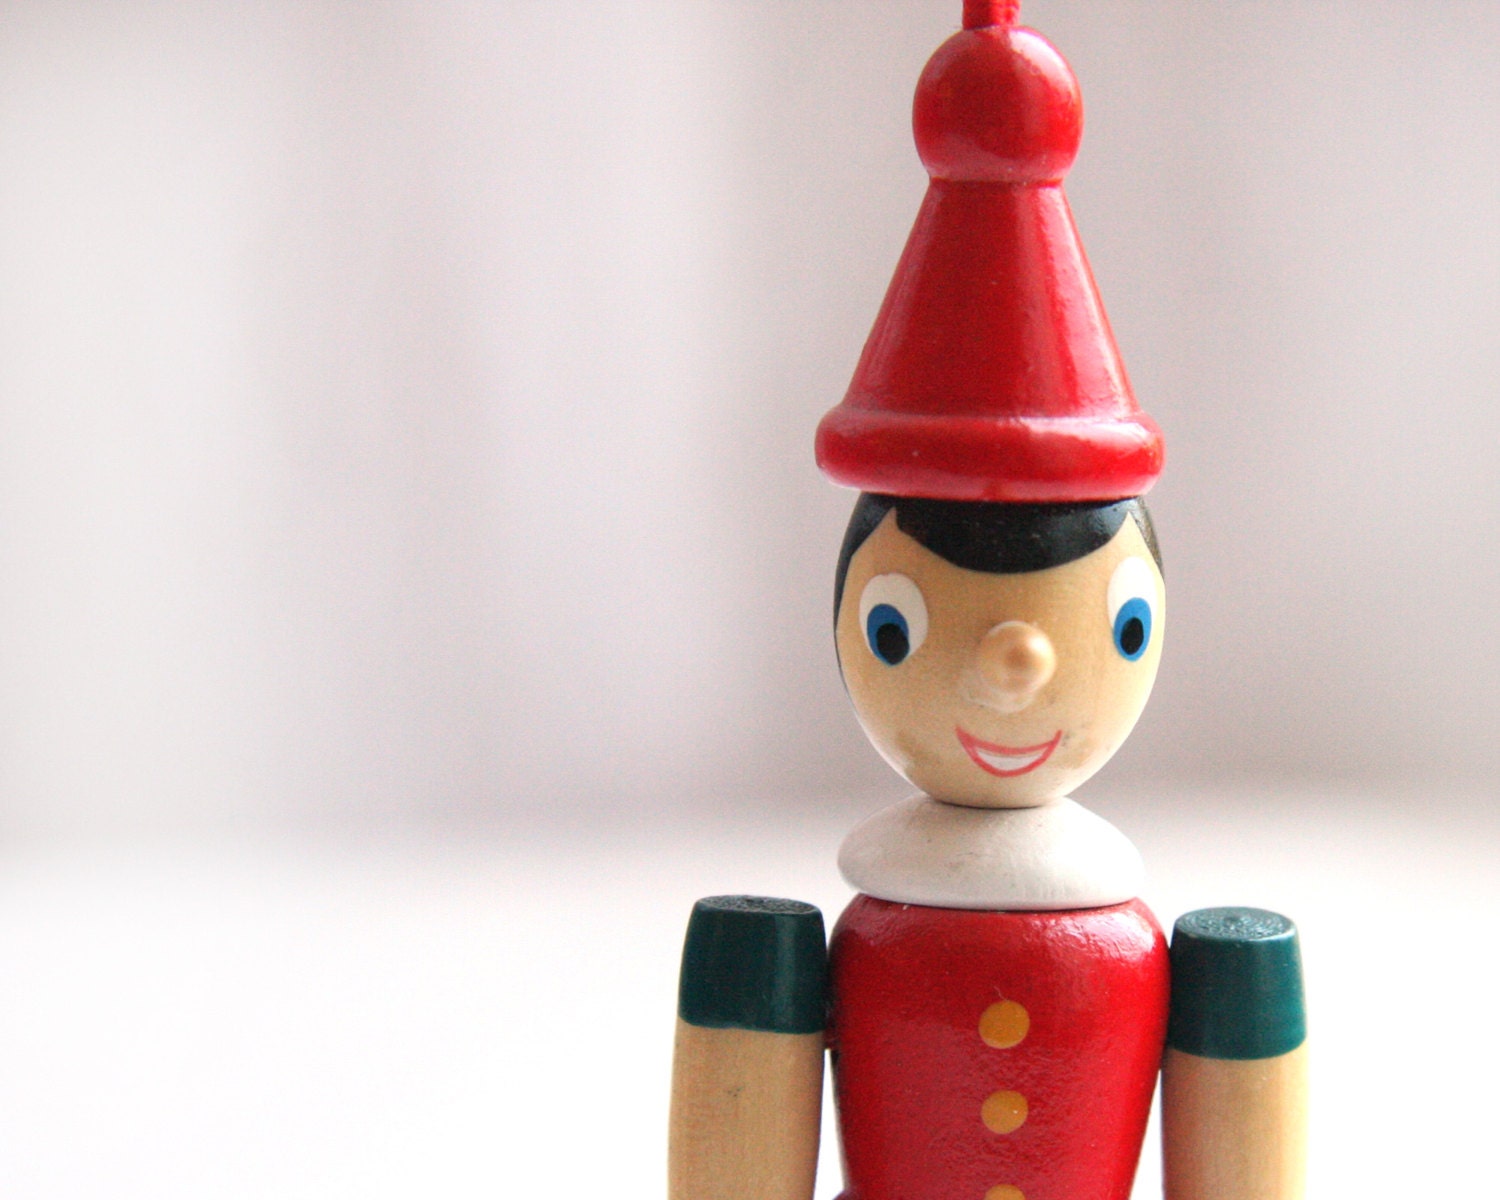 Pinocchio boy - toy made in Italy - original in mint condition - wooden figurine - red hat and jacket - atVintage